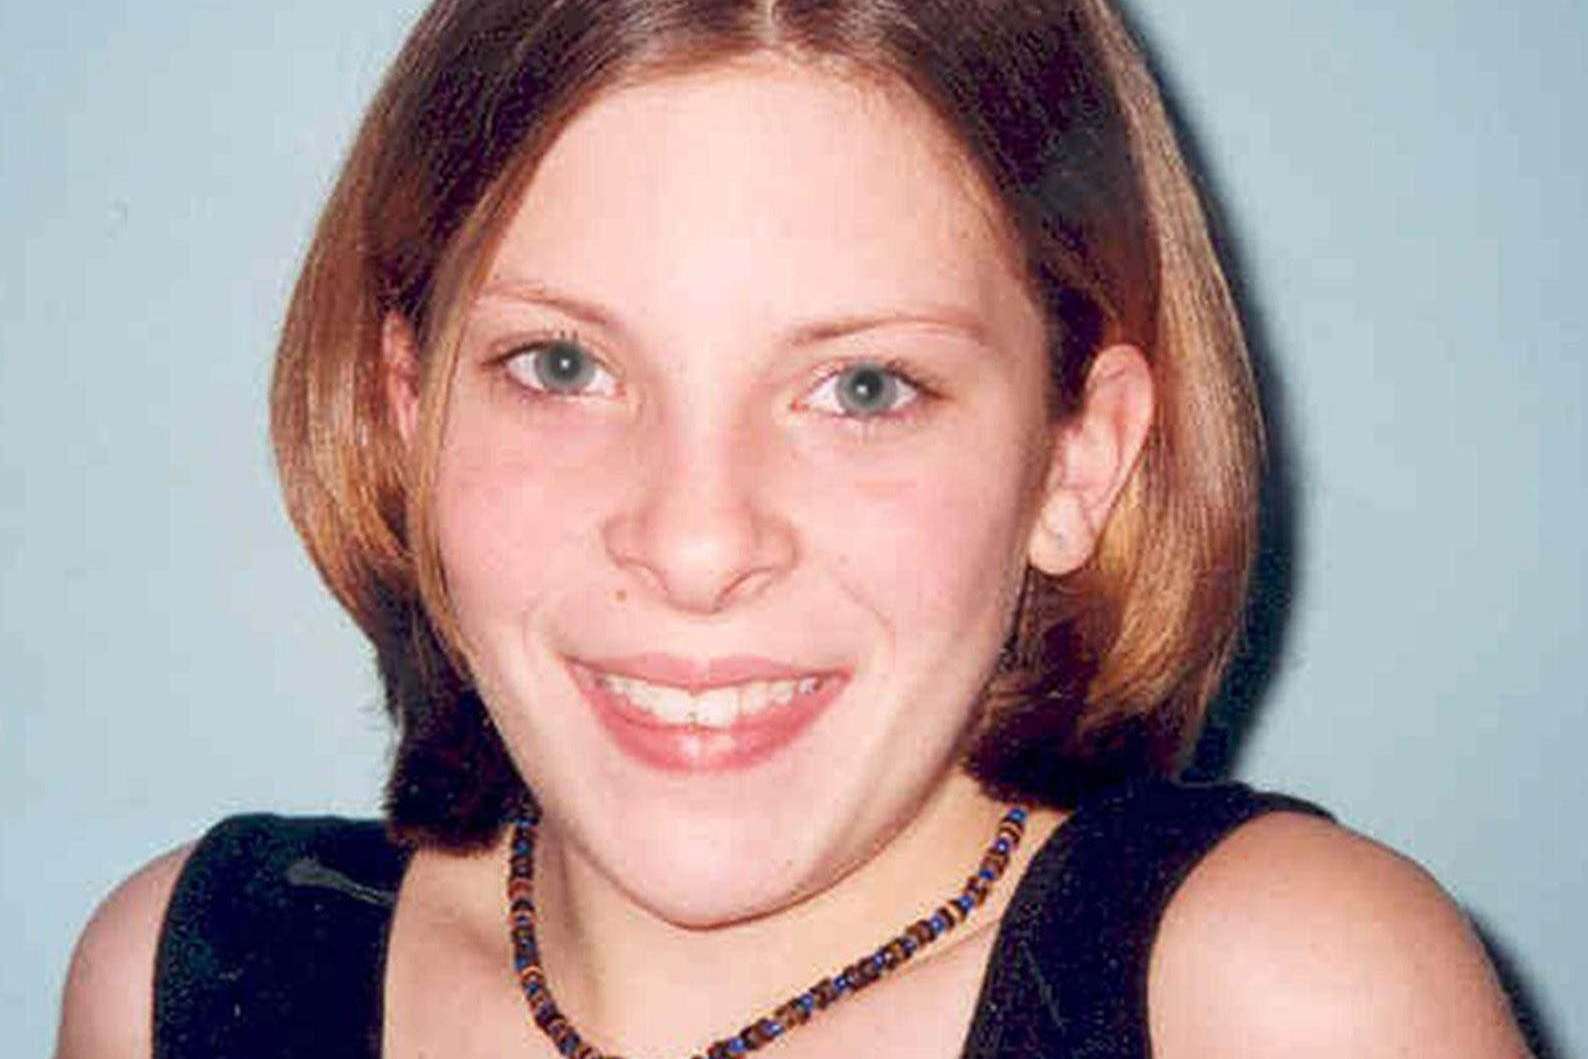 Milly Dowler, who was murdered by Levi Bellfield